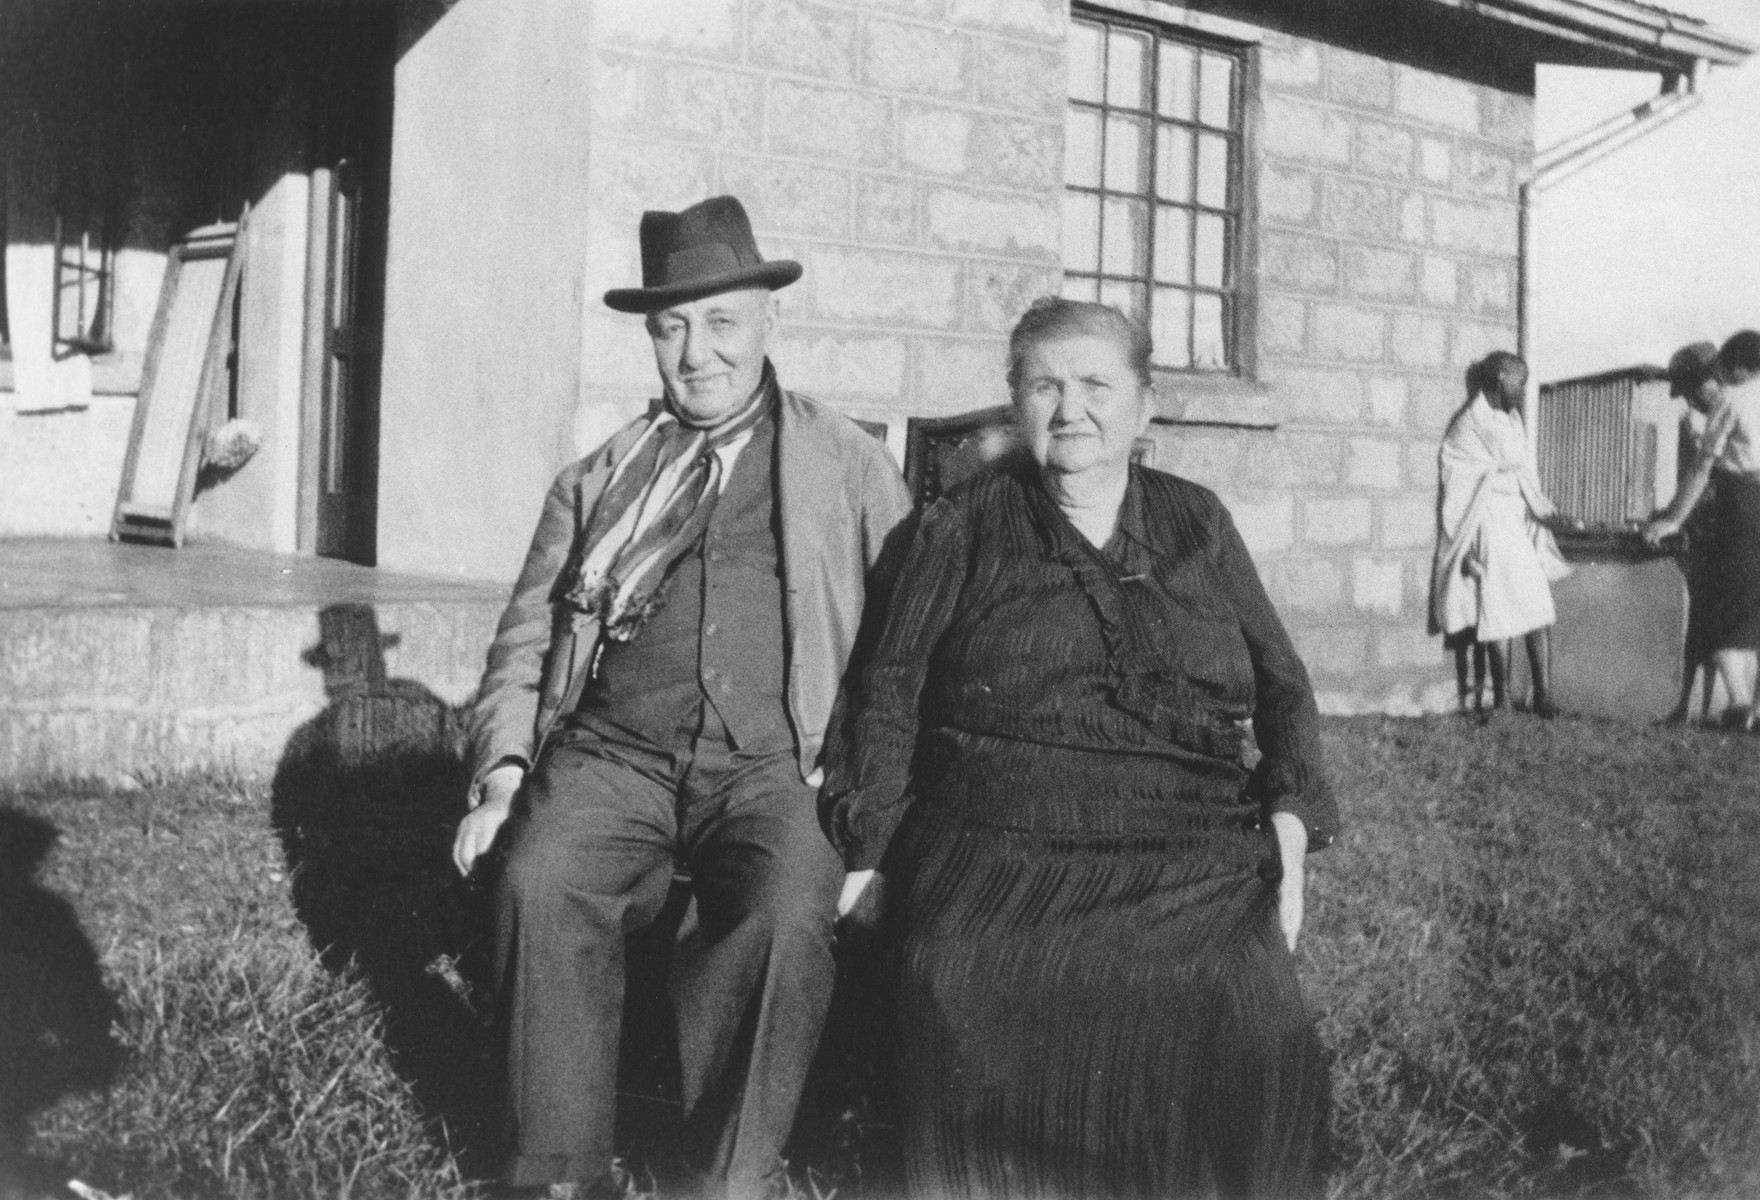 Portrait of a Jewish refugee couple on their farm near Limuru, Kenya (Kiambu district), where they found refuge with their children and grandchildren during World War II.

Pictured are Max and Klara Berg.  Max died in 1942, and Klara, in 1945.  They both were buried in the old Jewish cemetery in Nairobi.